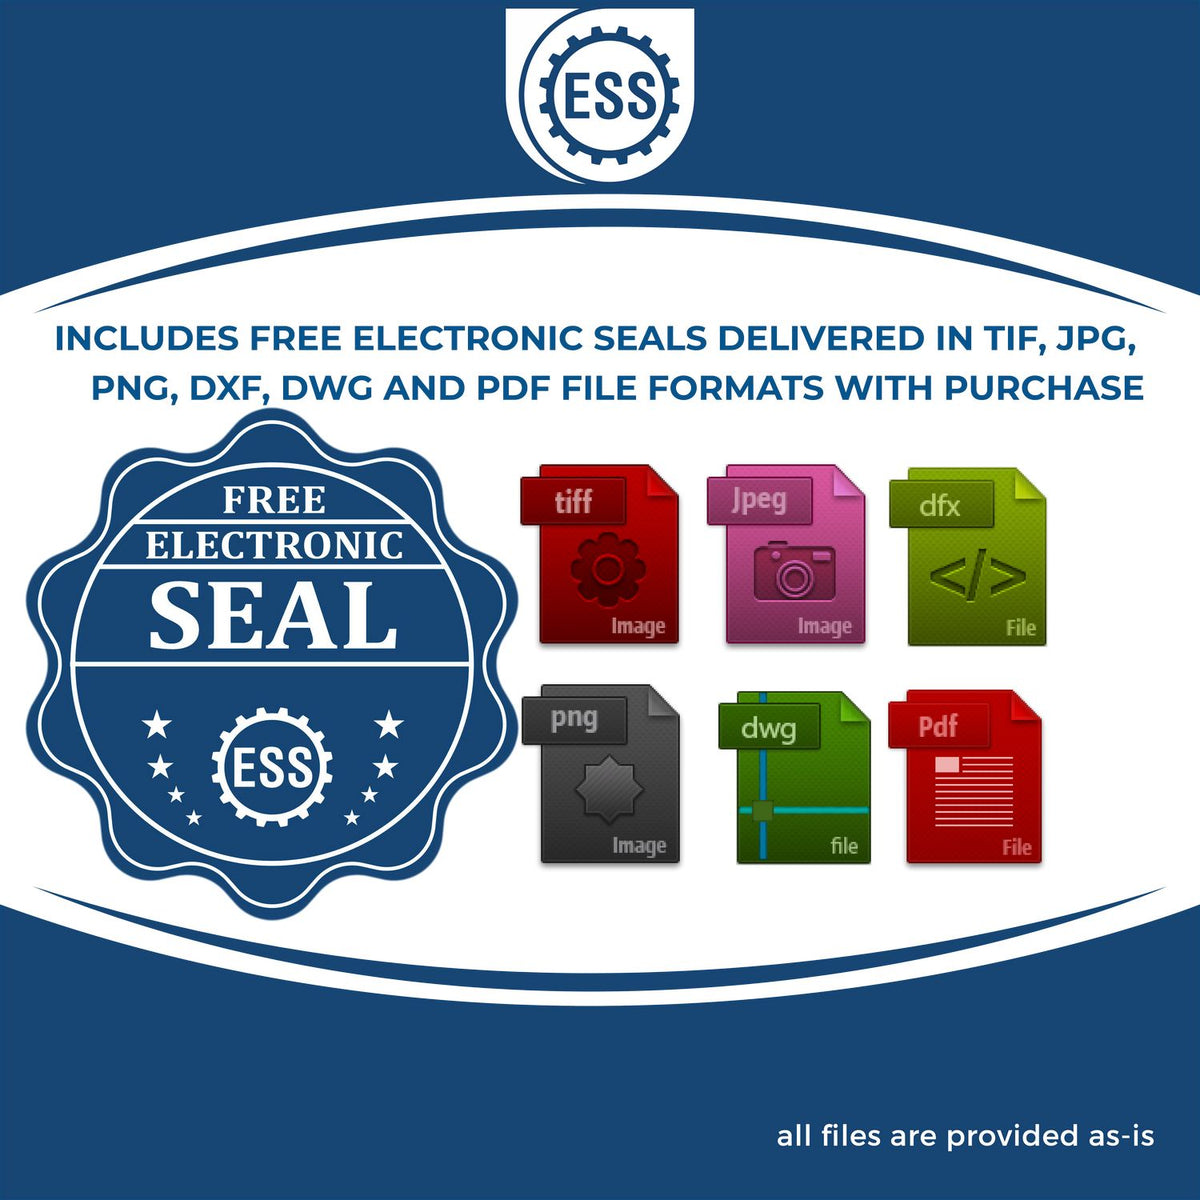 An infographic for the free electronic seal for the Hybrid Maine Landscape Architect Seal illustrating the different file type icons such as DXF, DWG, TIF, JPG and PNG.